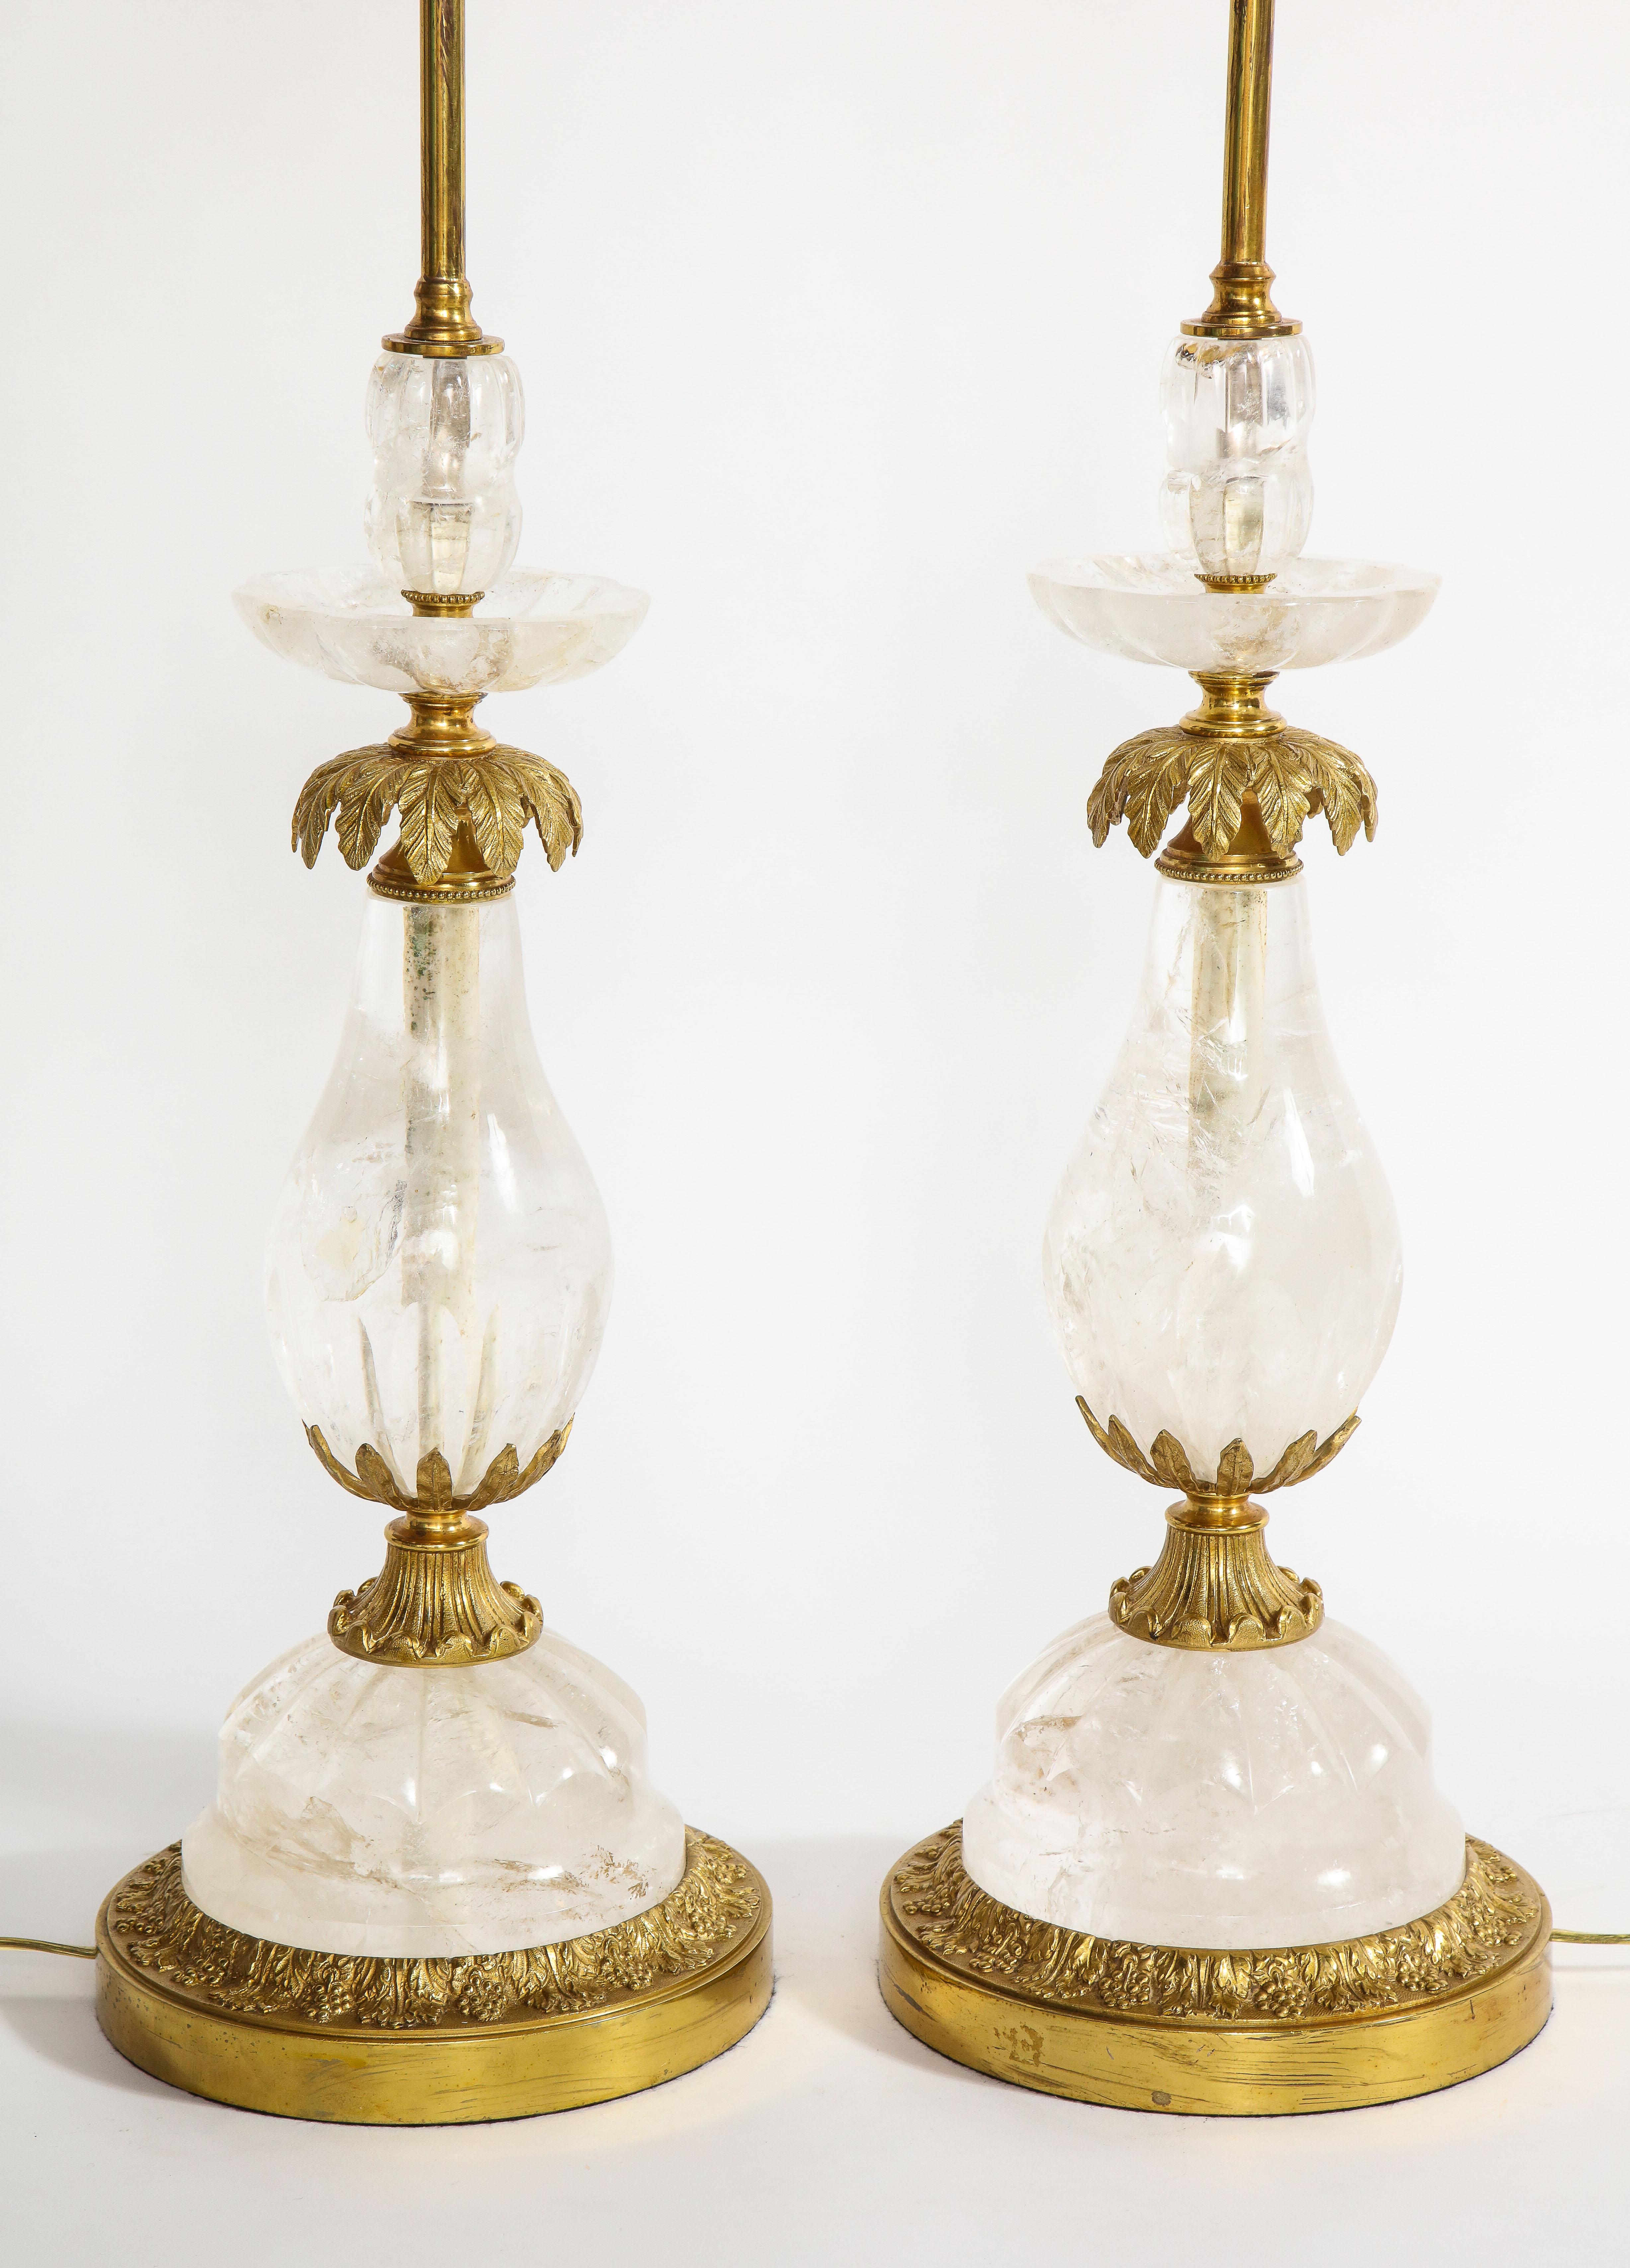 Pair of Art Deco Ormolu Mounted Palm Tree Form Rock Crystal Quartz Lamps For Sale 4